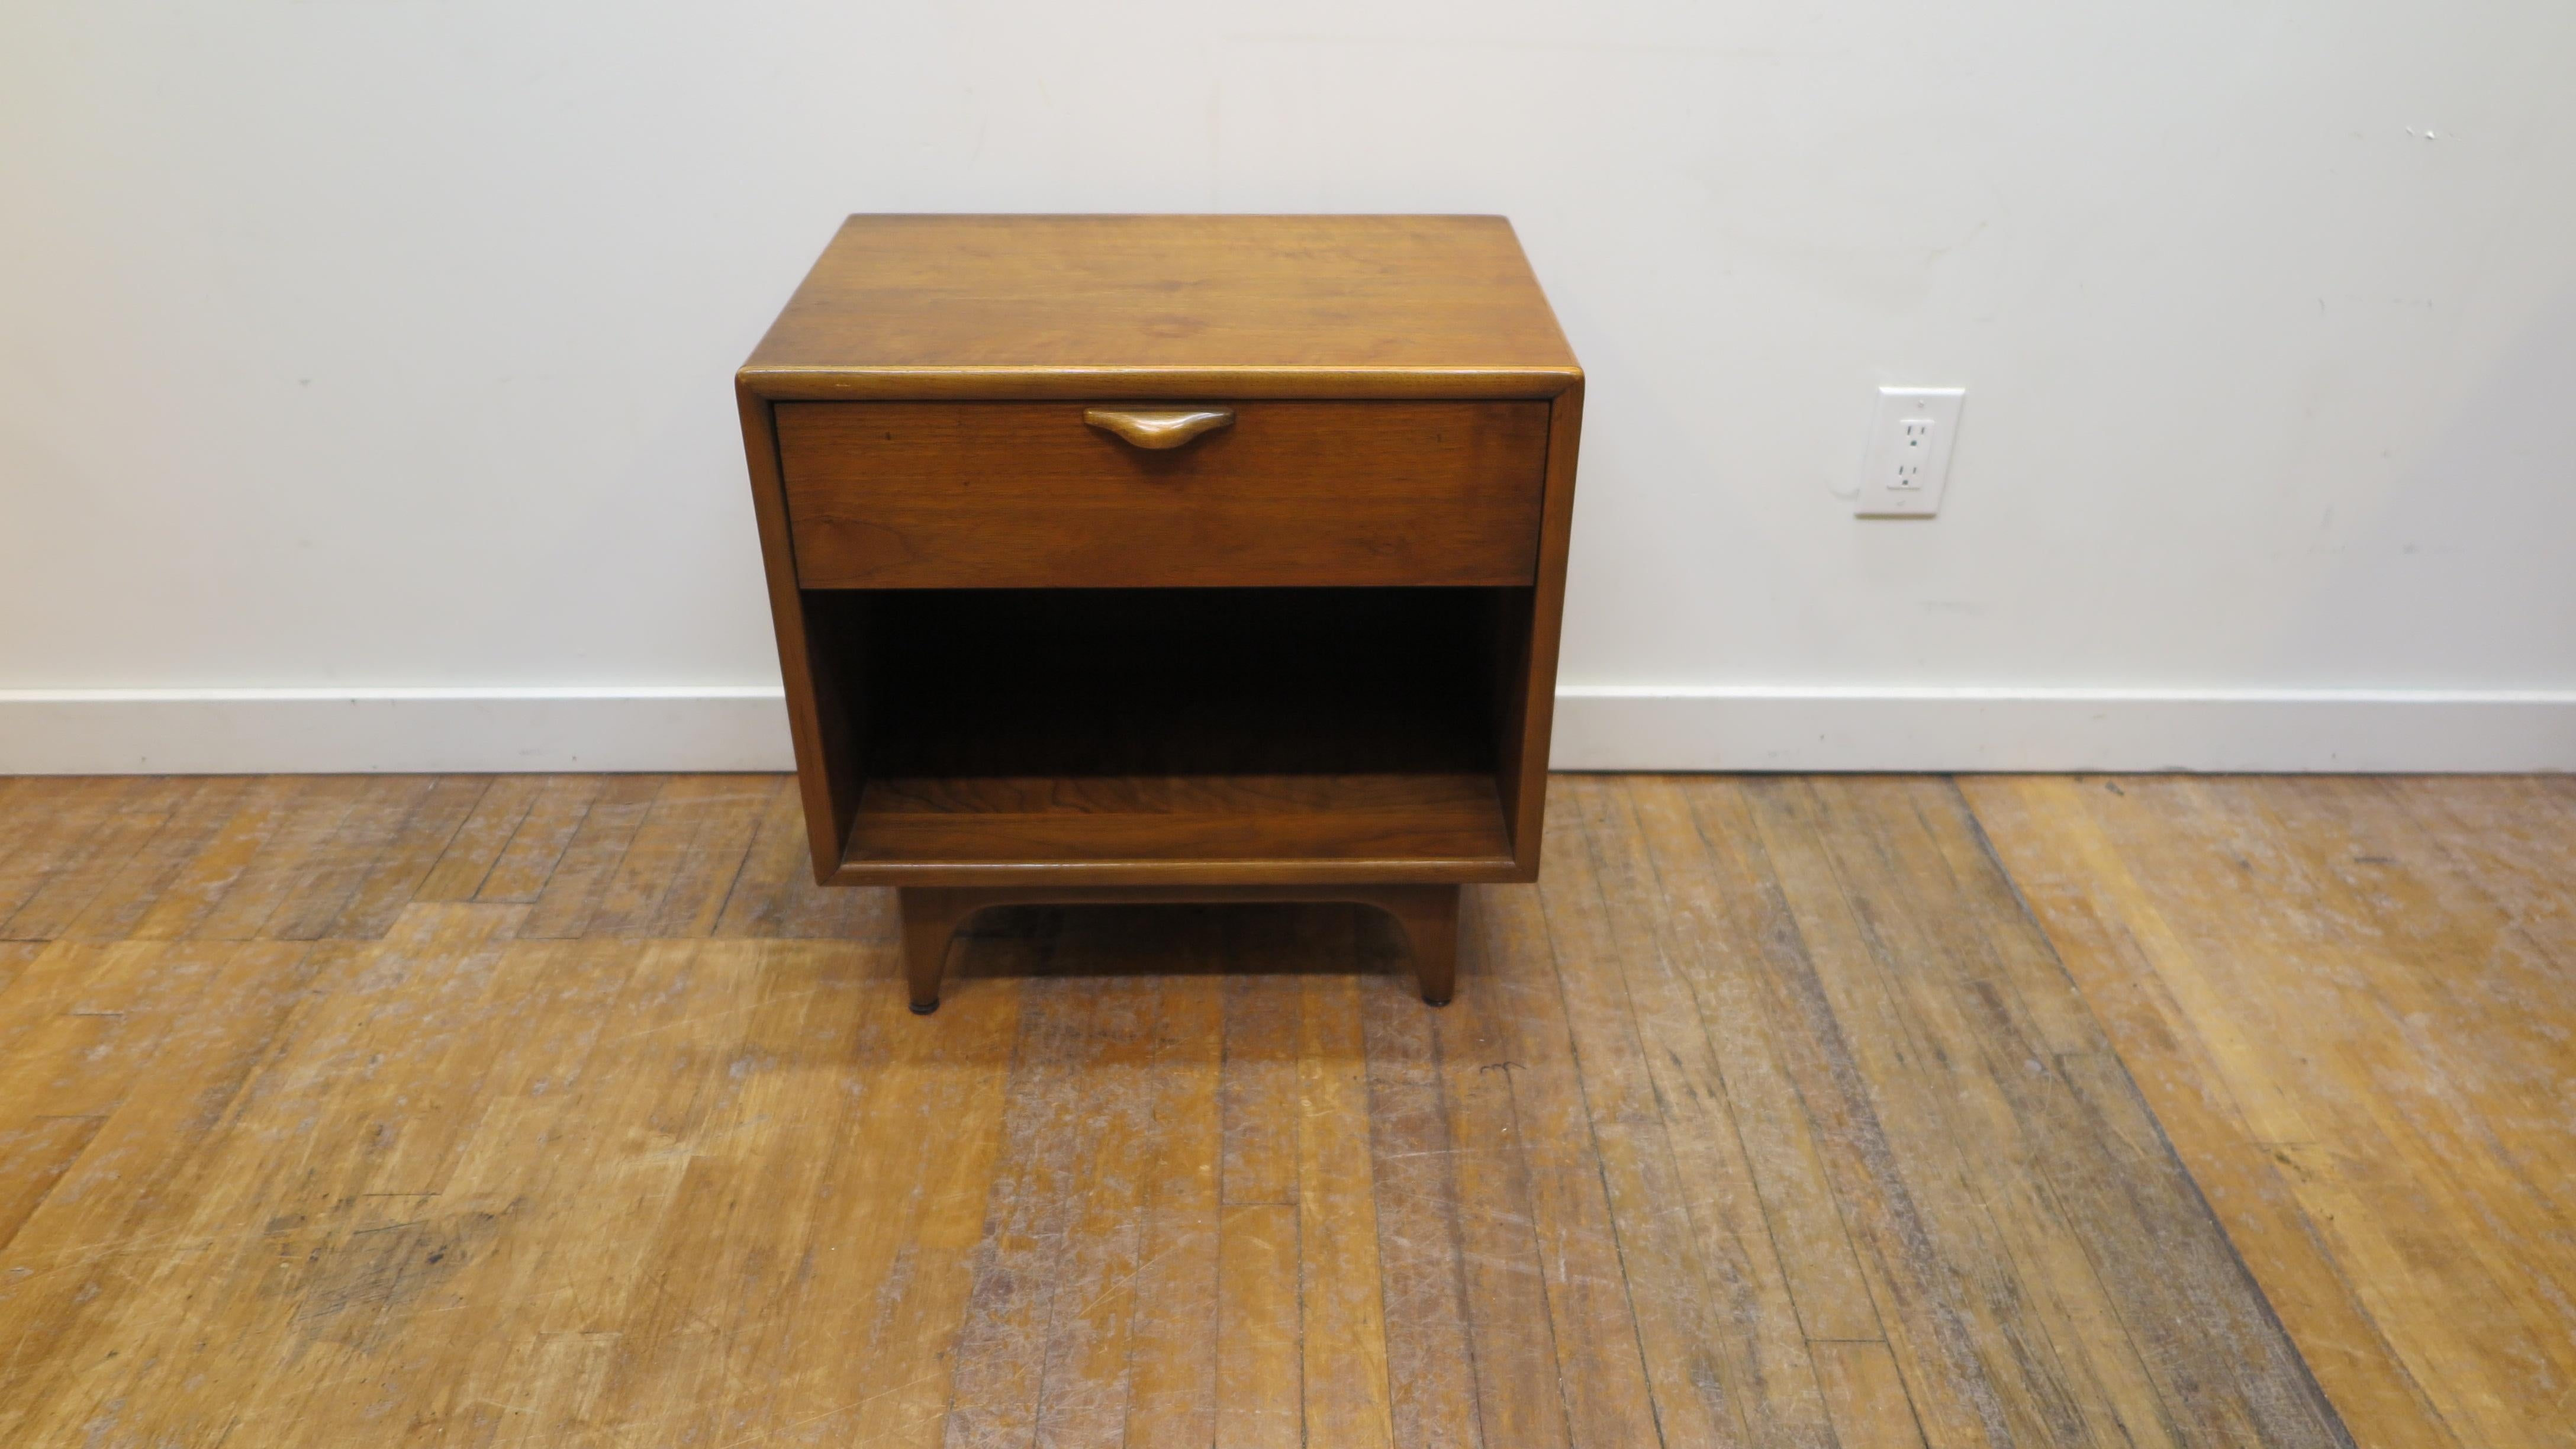 Lane side table night stand perception line. Mid century modern side table night stand by Lane AltaVista Perception Line. Minimalist modern cube with waterfall edges and sculpted handle in walnut. Good good condition. American Mid-Century Modern